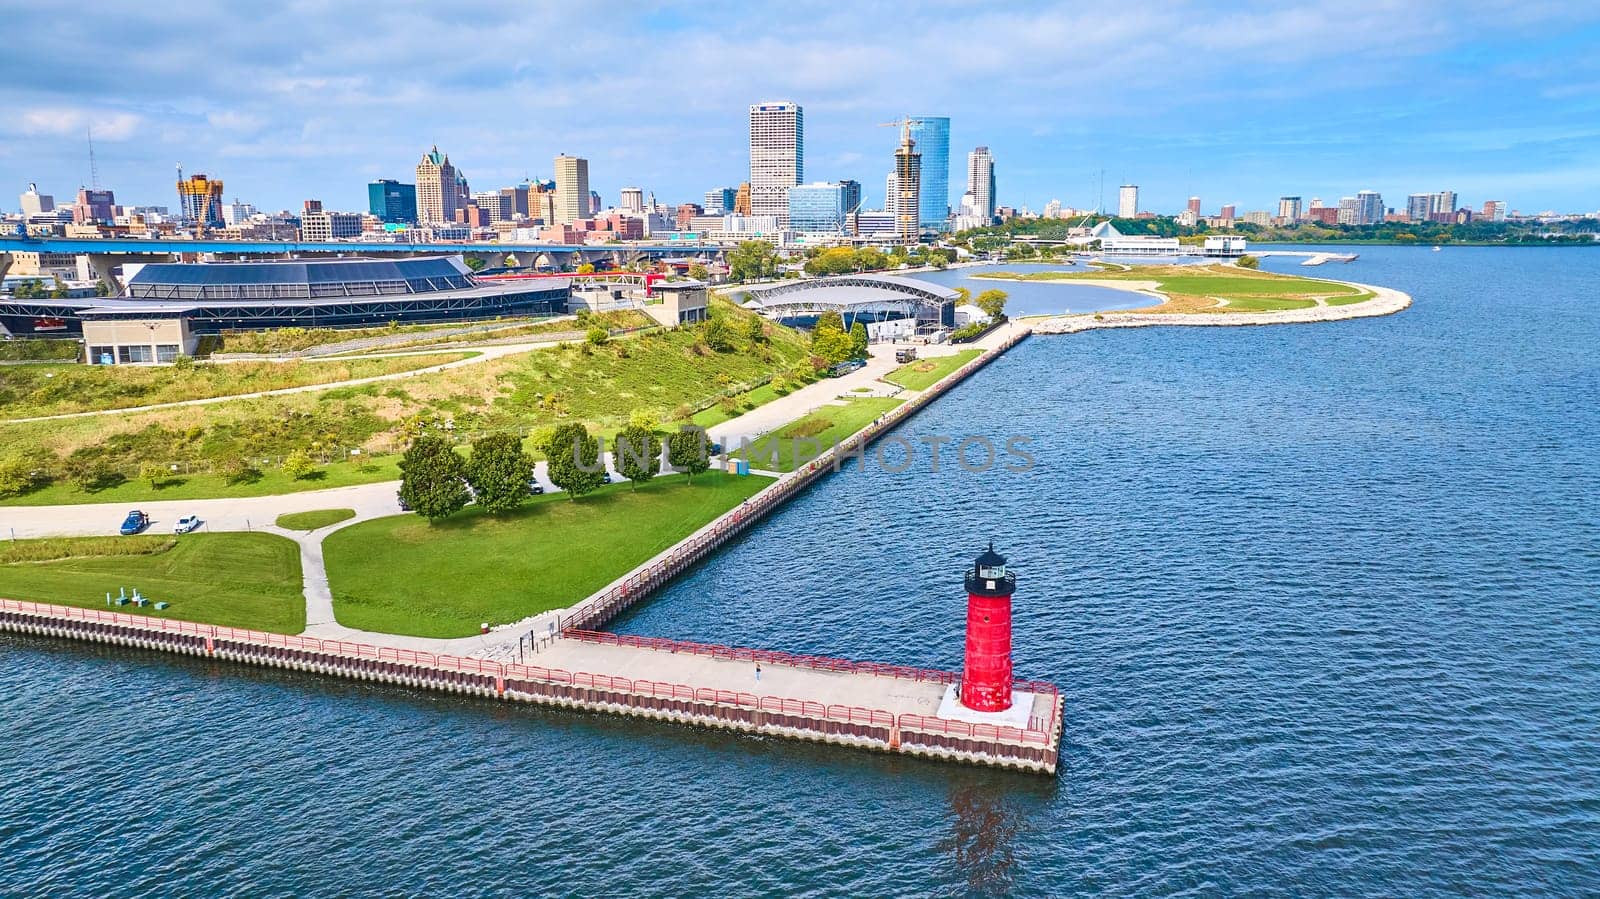 Aerial View of Milwaukee Pierhead Lighthouse and Coastal Cityscape by njproductions